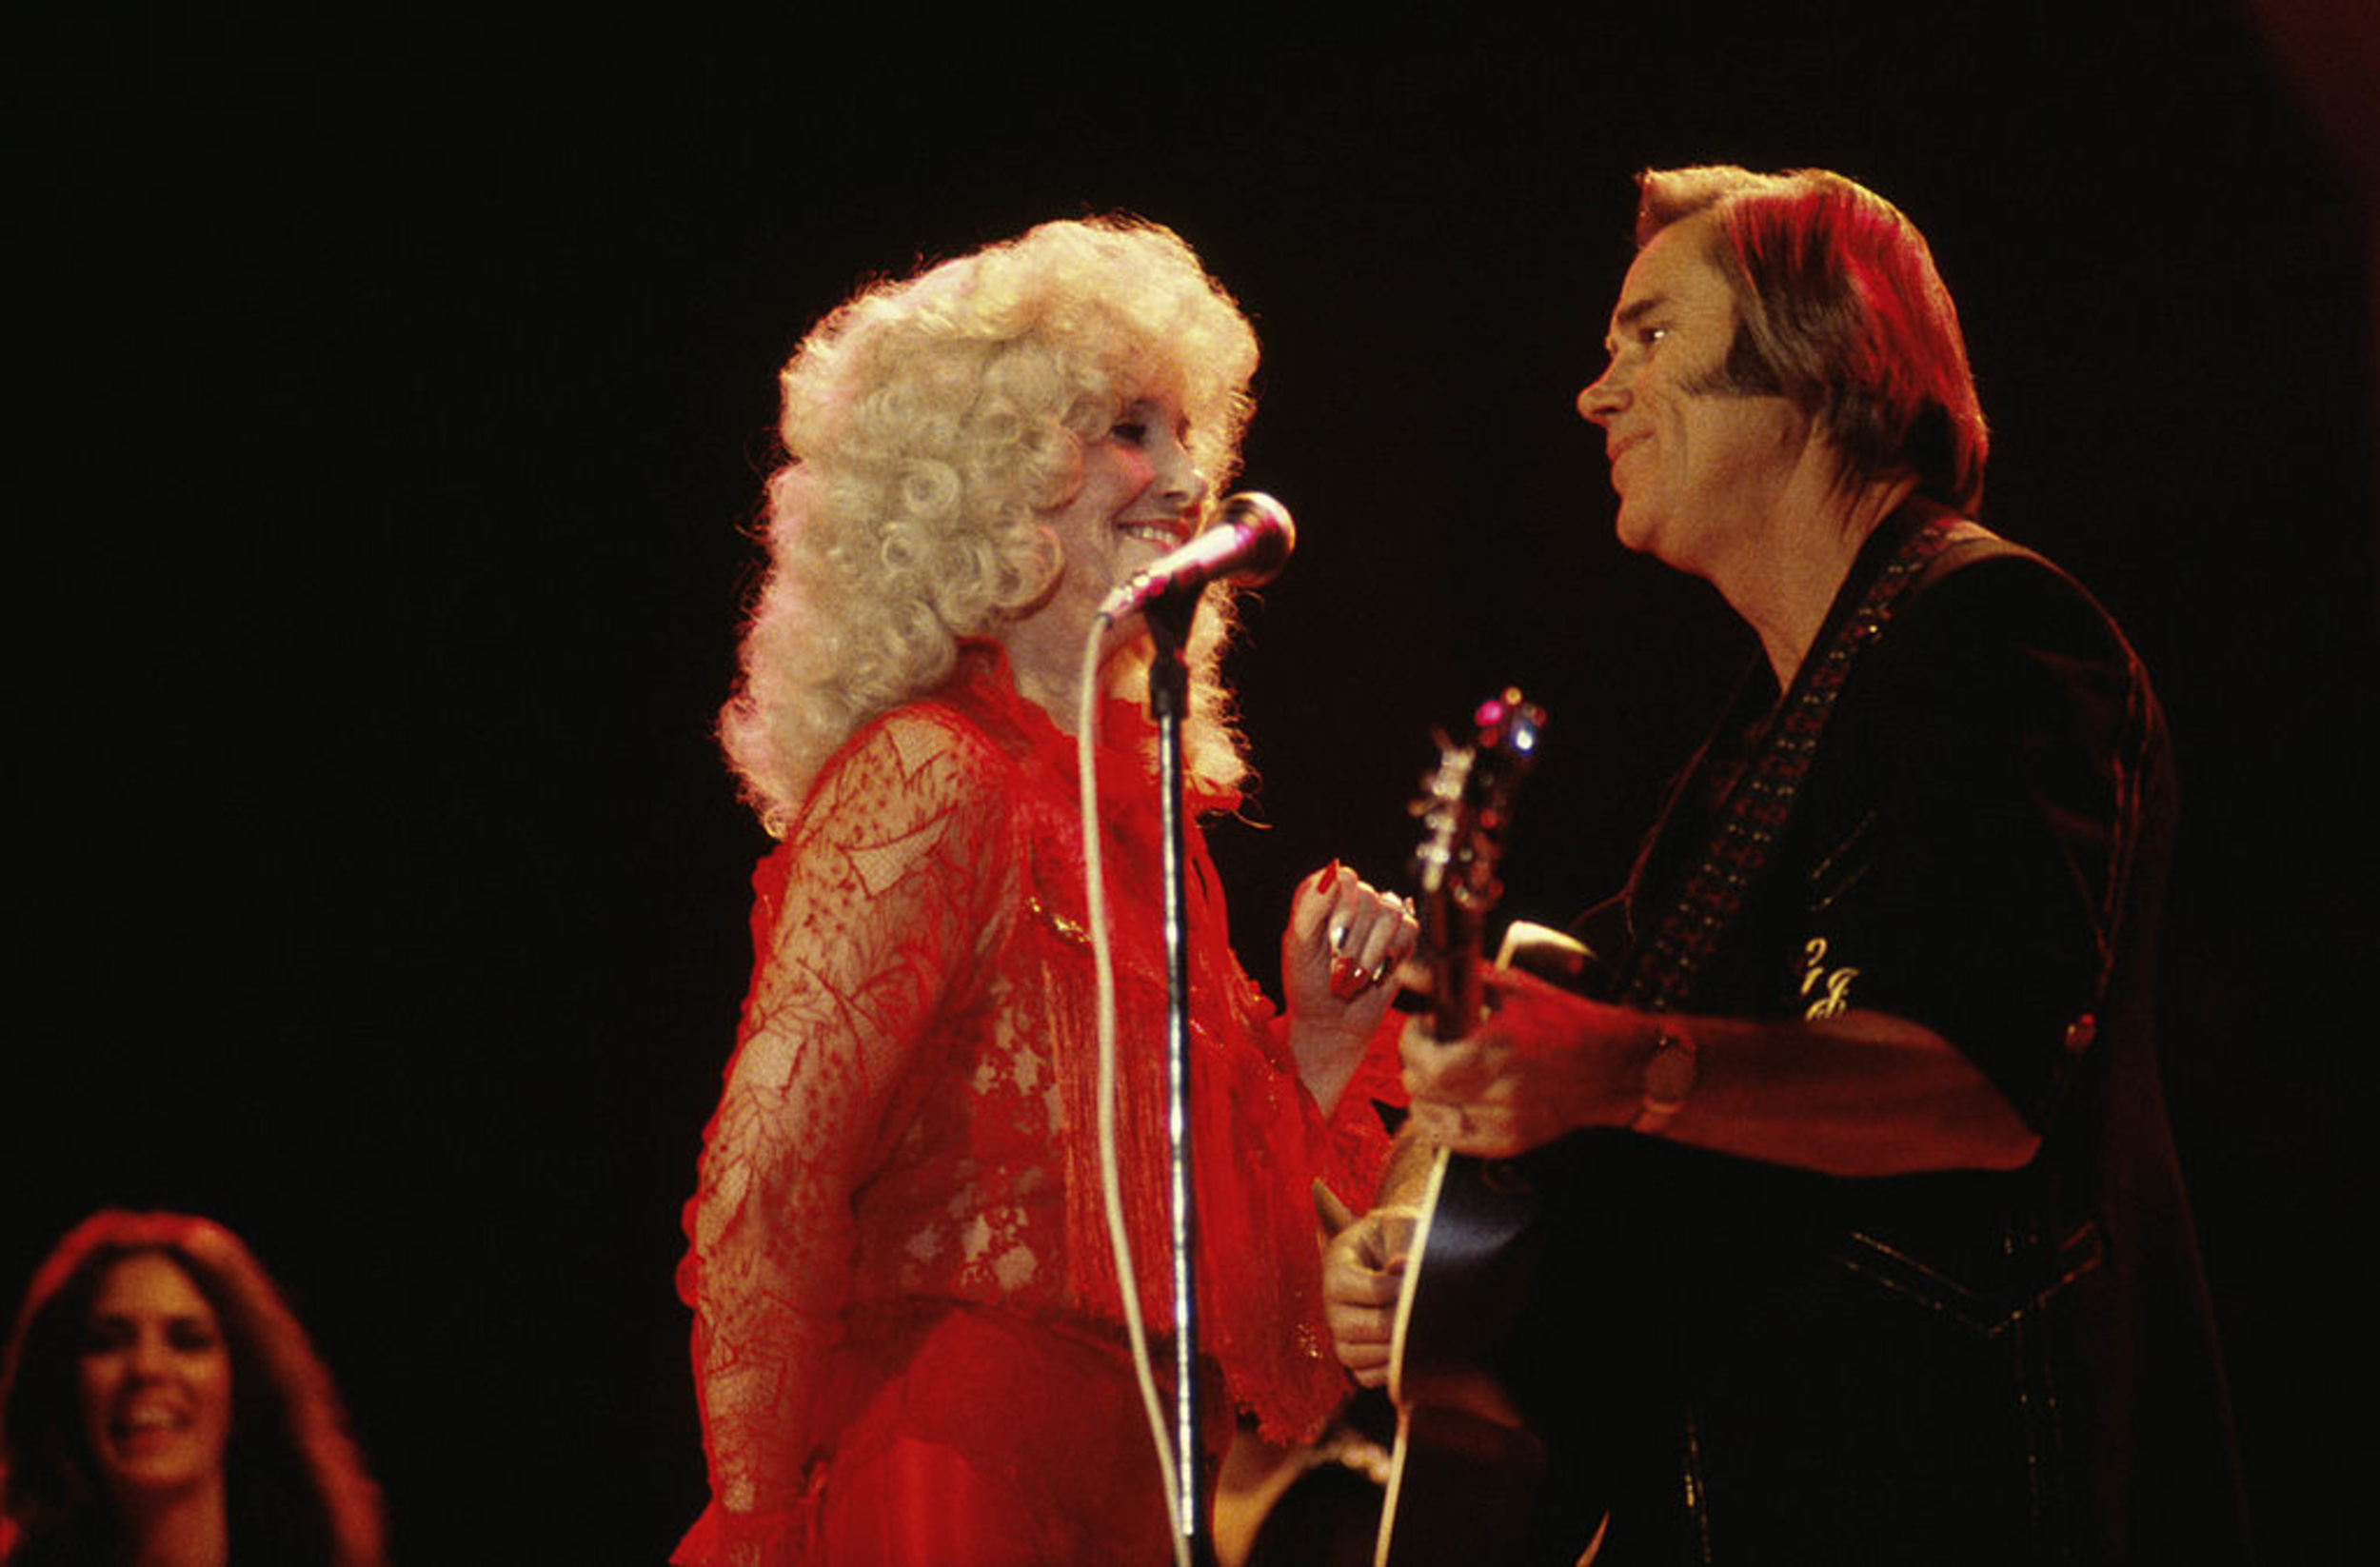 <p>Throughout their tumultuous marriage, George Jones and Tammy Wynette explore making it work on "We're Gonna Hold On." The song was co-written by Jones and released shortly after the couple reconciled in the midst of his battle with alcoholism. </p><p><a href='https://www.msn.com/en-us/community/channel/vid-cj9pqbr0vn9in2b6ddcd8sfgpfq6x6utp44fssrv6mc2gtybw0us'>Follow us on MSN to see more of our exclusive entertainment content.</a></p>